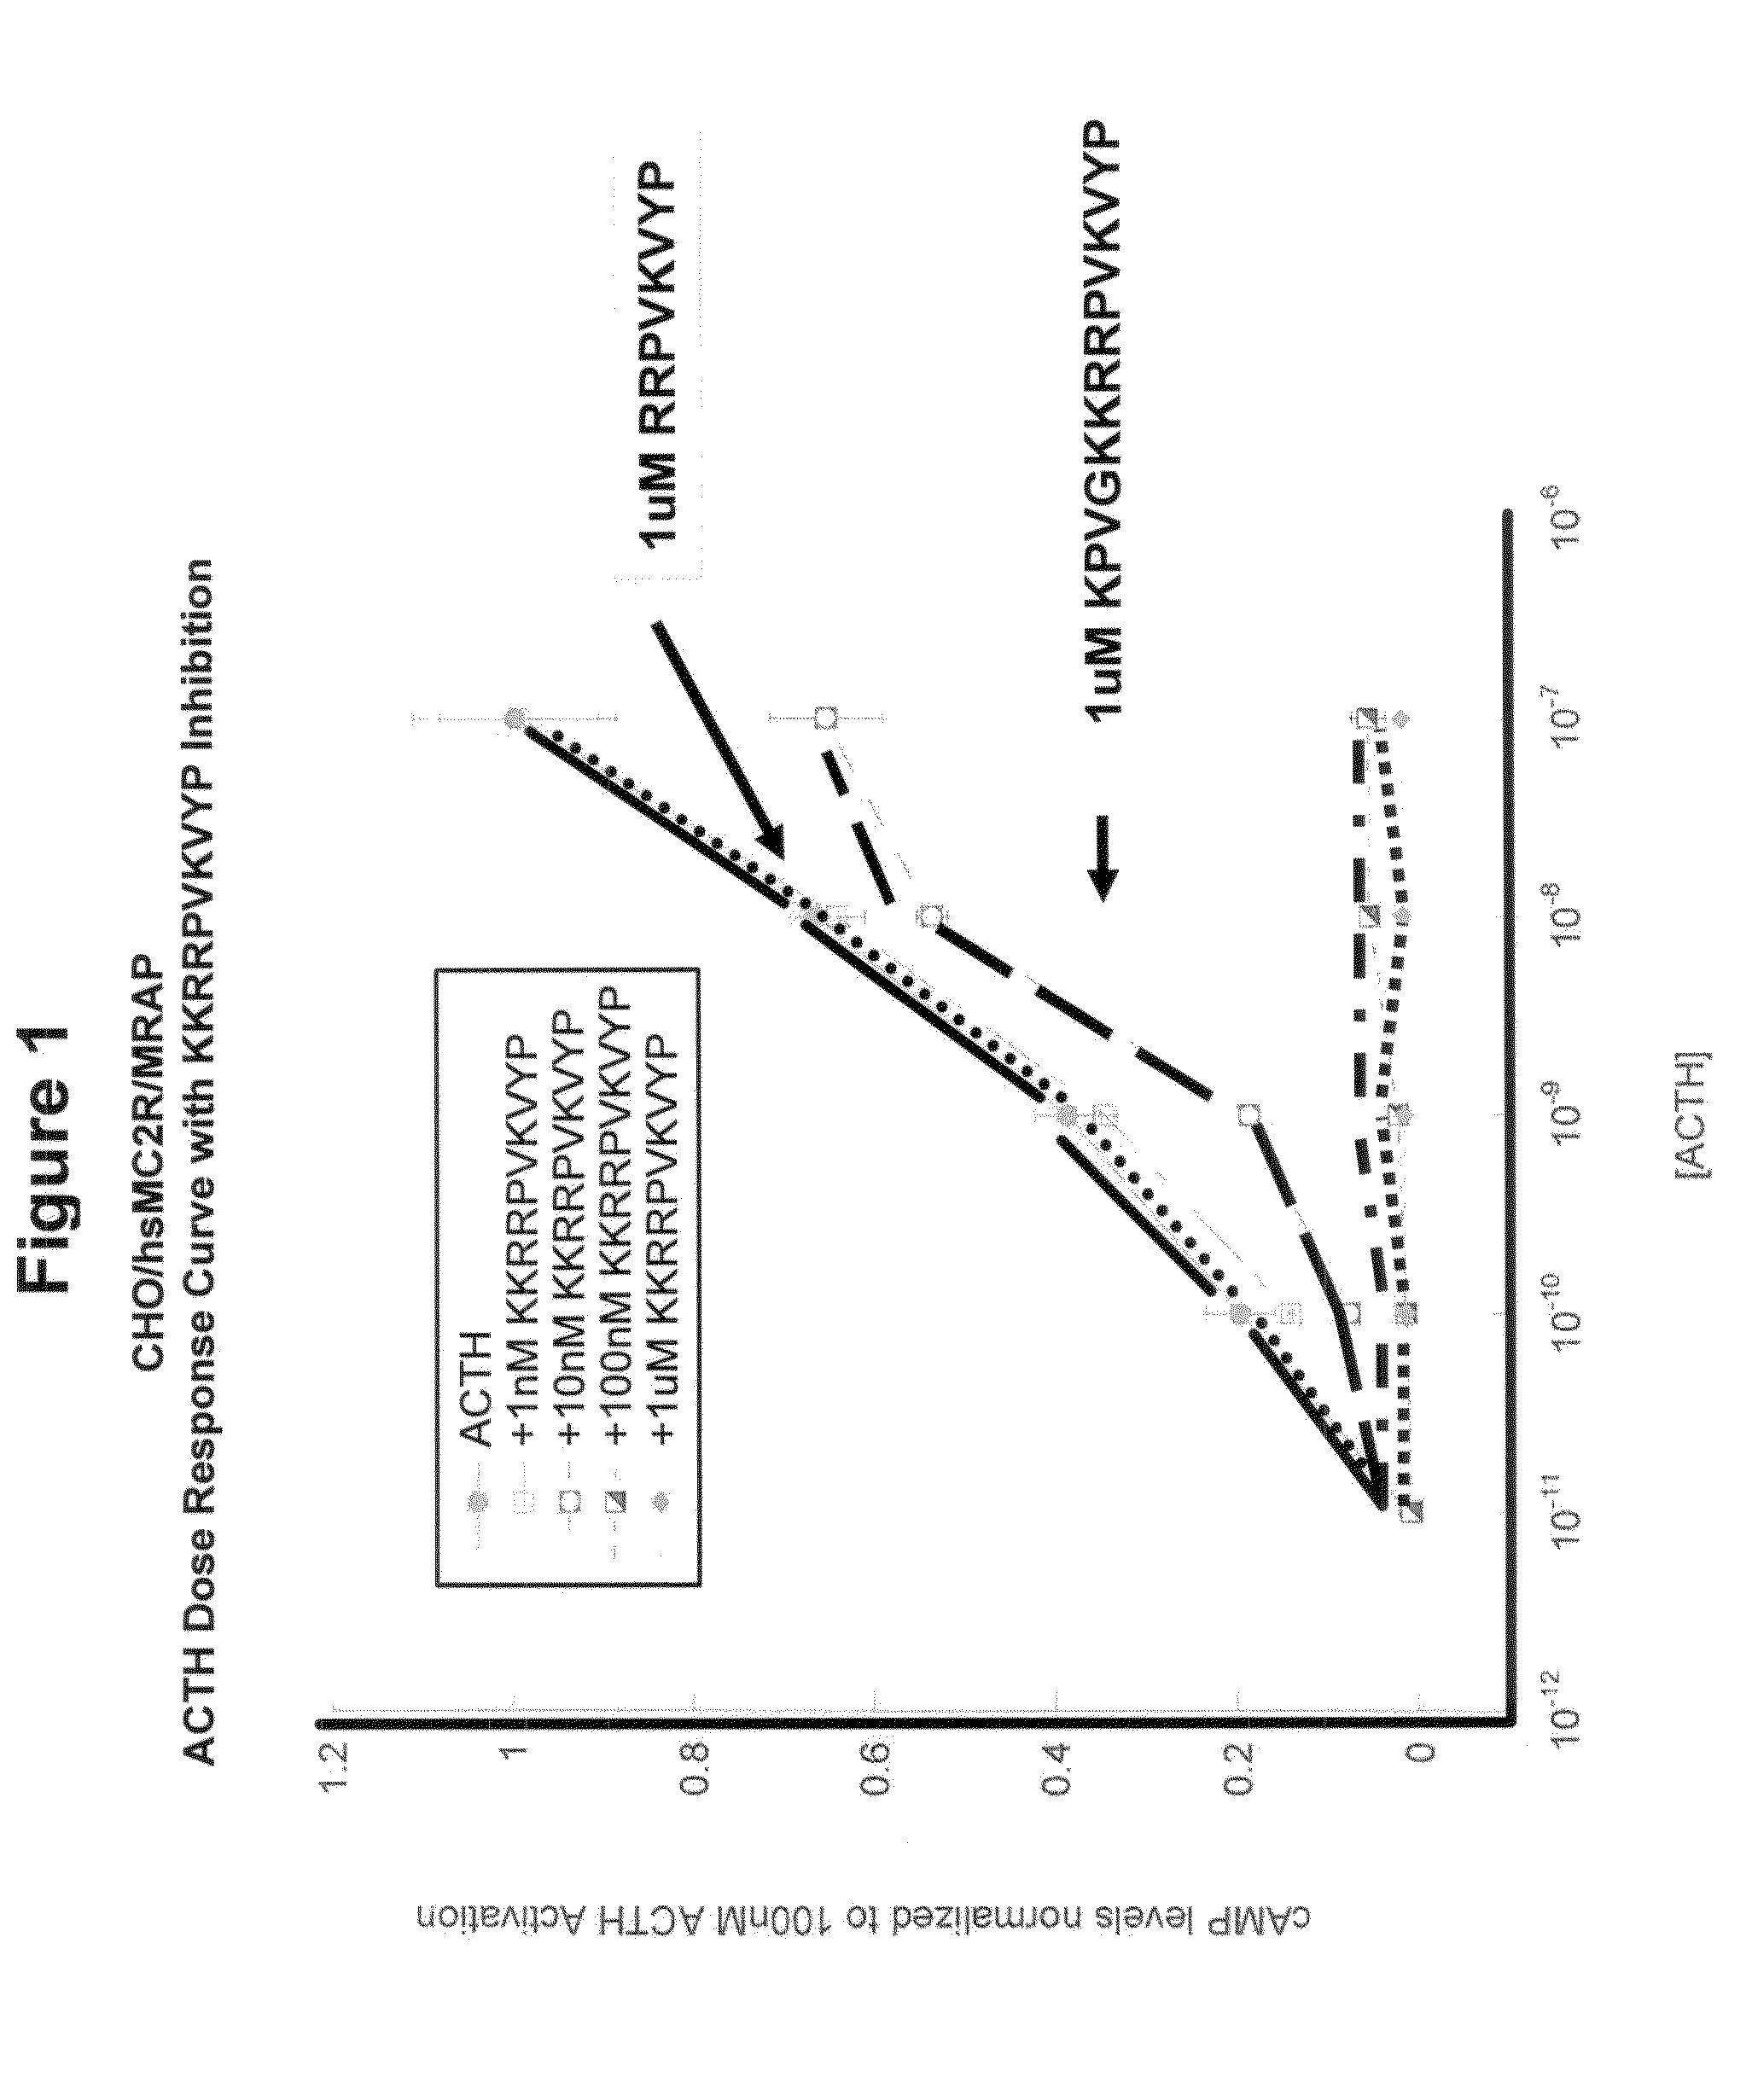 Methods of treating overproduction of cortisol using ACTH antagonist peptides